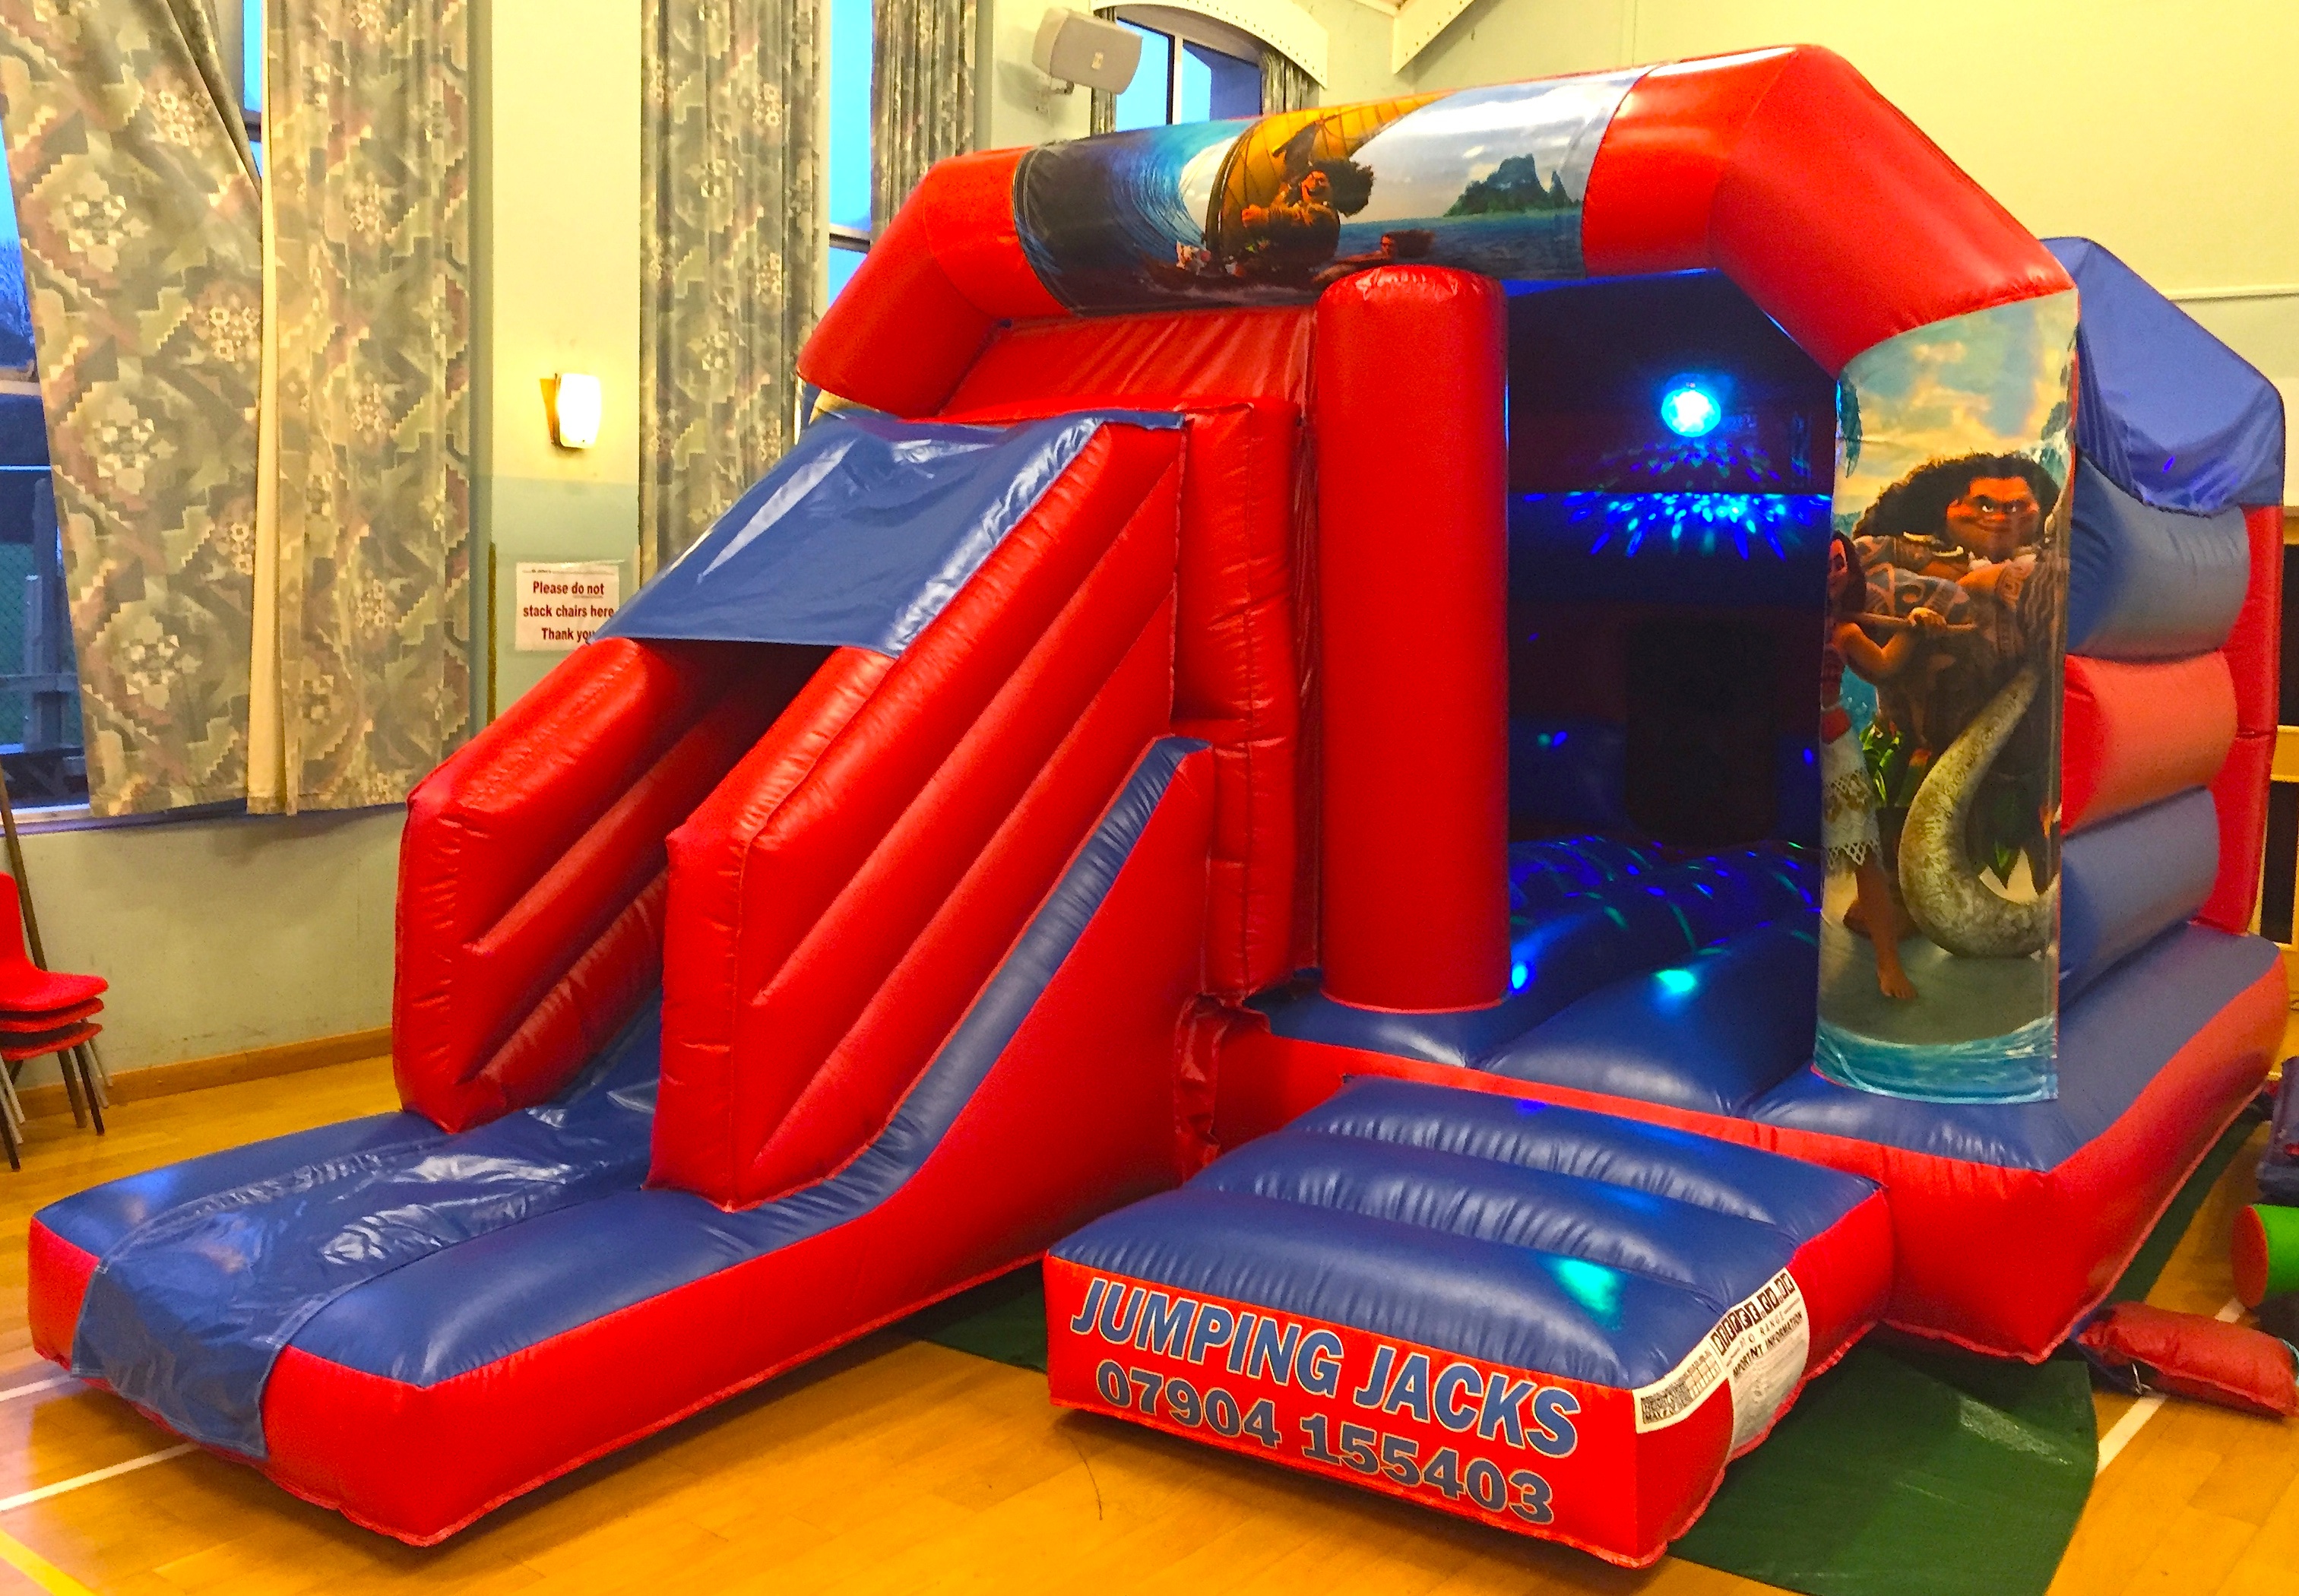 Moana Disco Castle With Slide Bouncy Castle Hire In Bromley Croydon South East London South West London